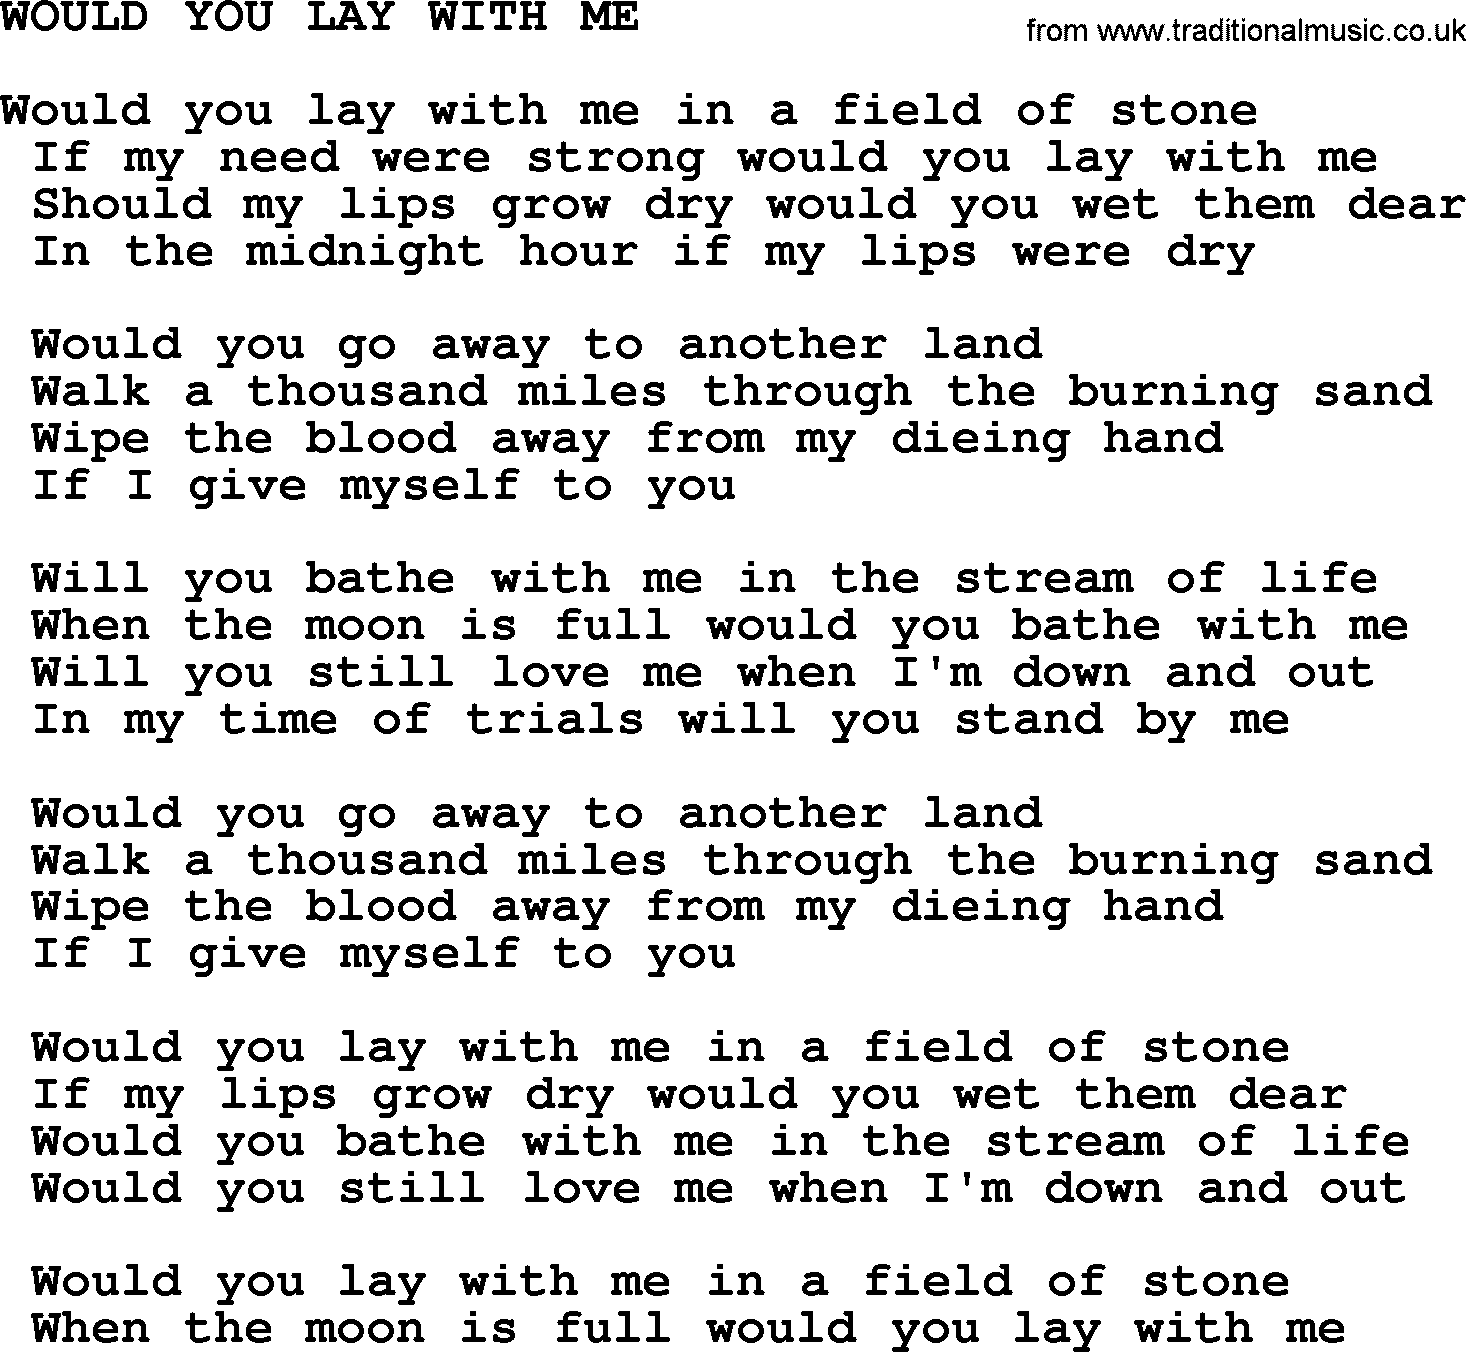 Johnny Cash song Would You Lay With Me.txt lyrics